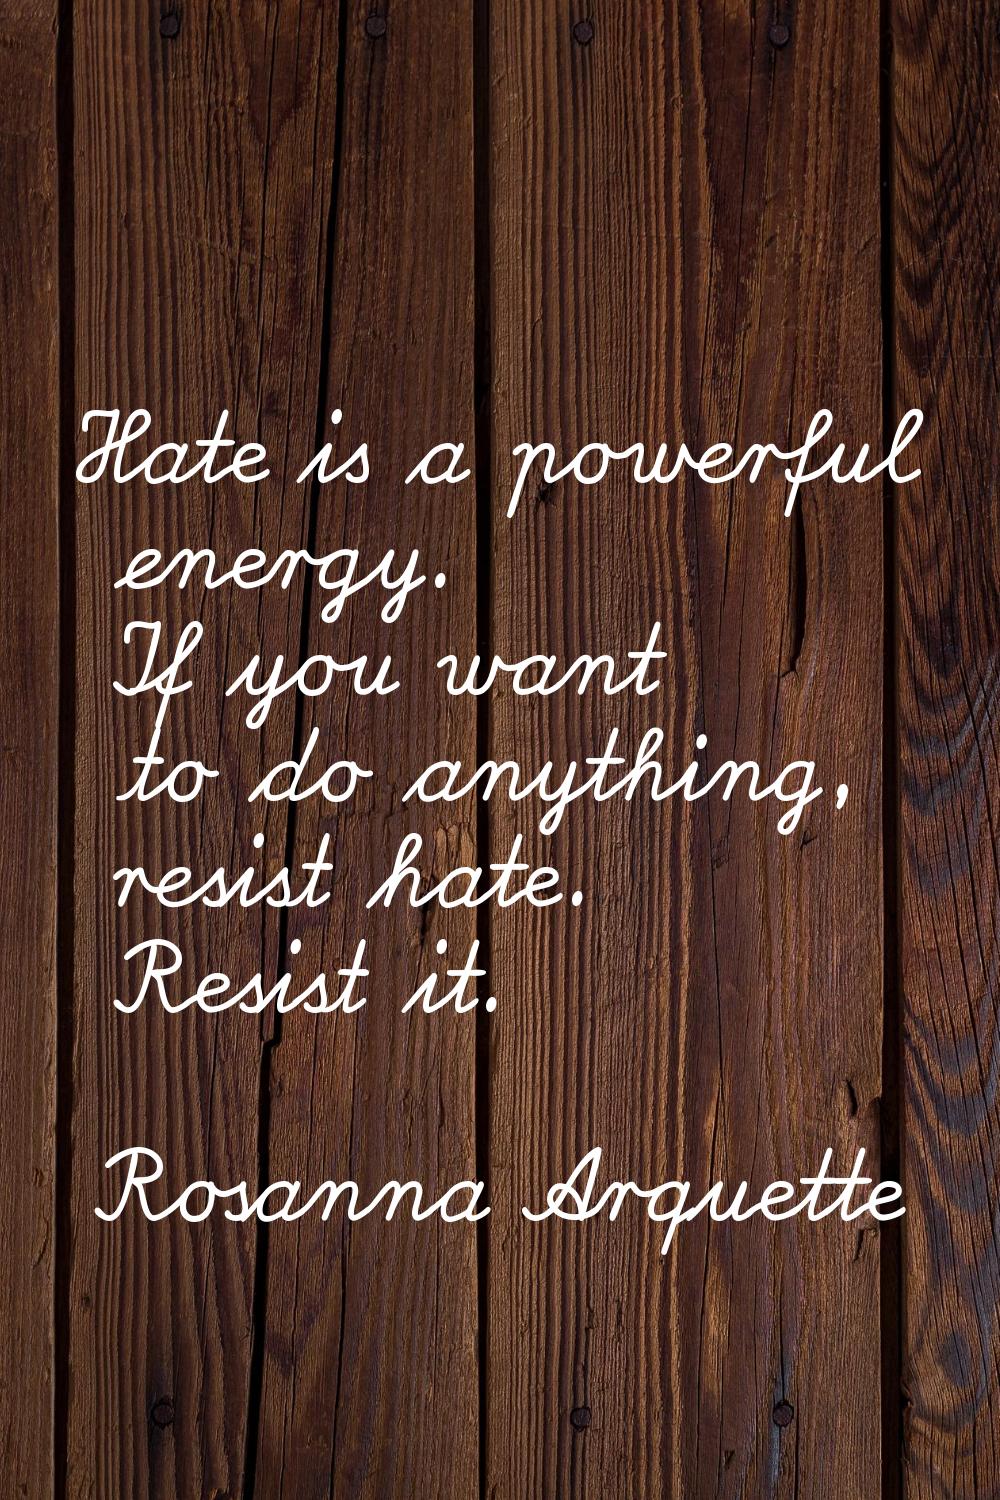 Hate is a powerful energy. If you want to do anything, resist hate. Resist it.